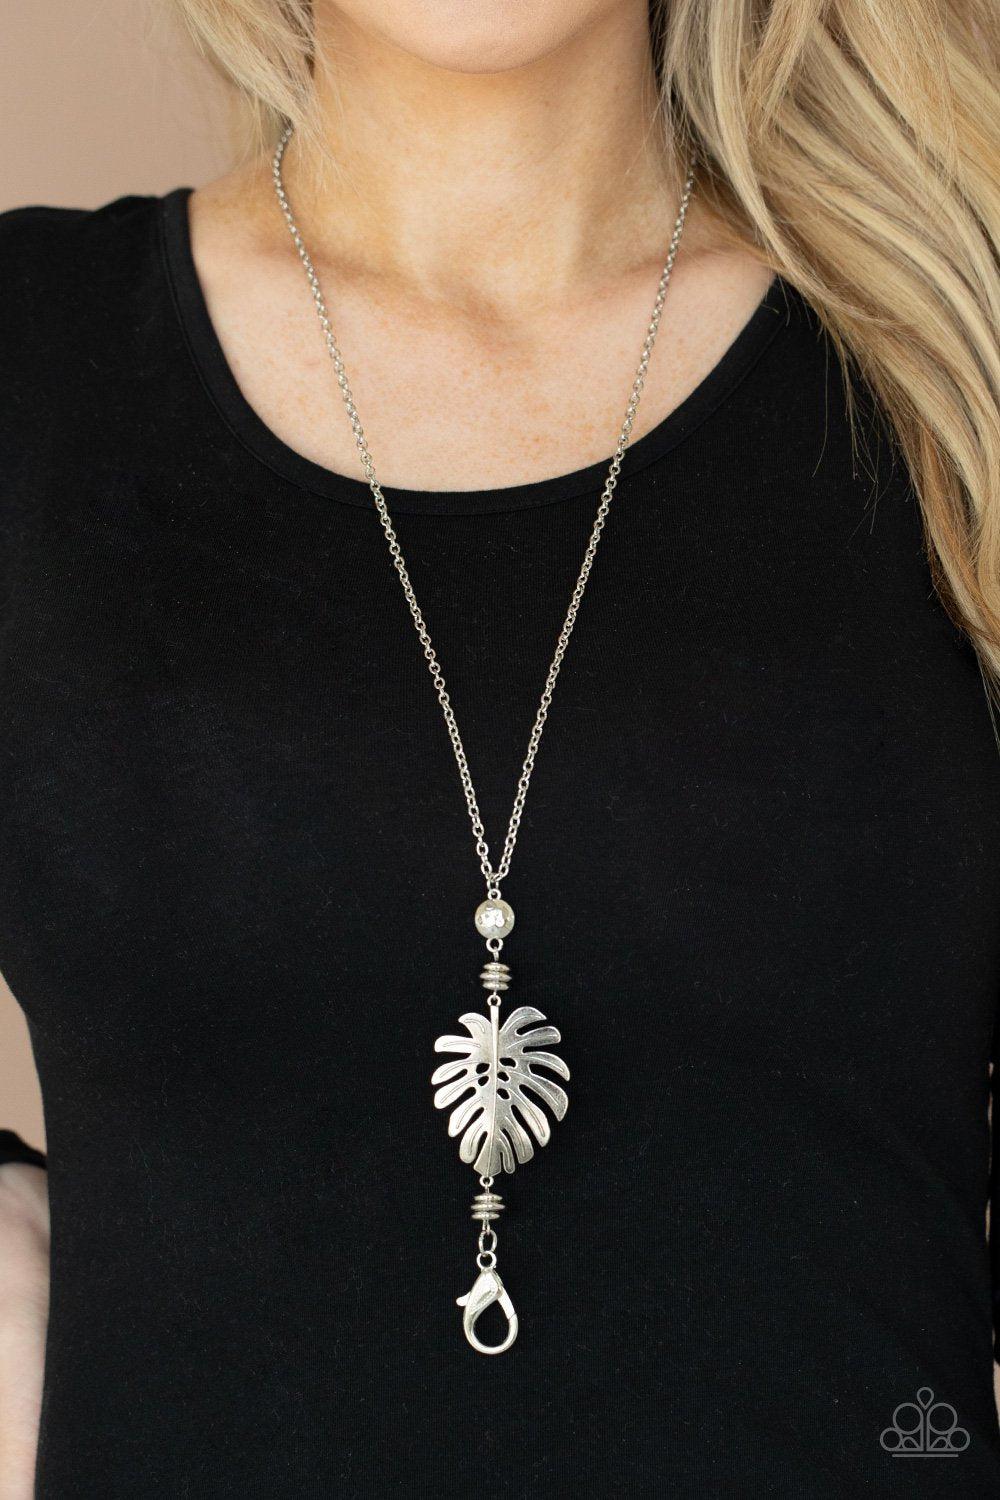 Palm Promenade Silver Palm Leaf Lanyard Necklace - Paparazzi Accessories- model - CarasShop.com - $5 Jewelry by Cara Jewels